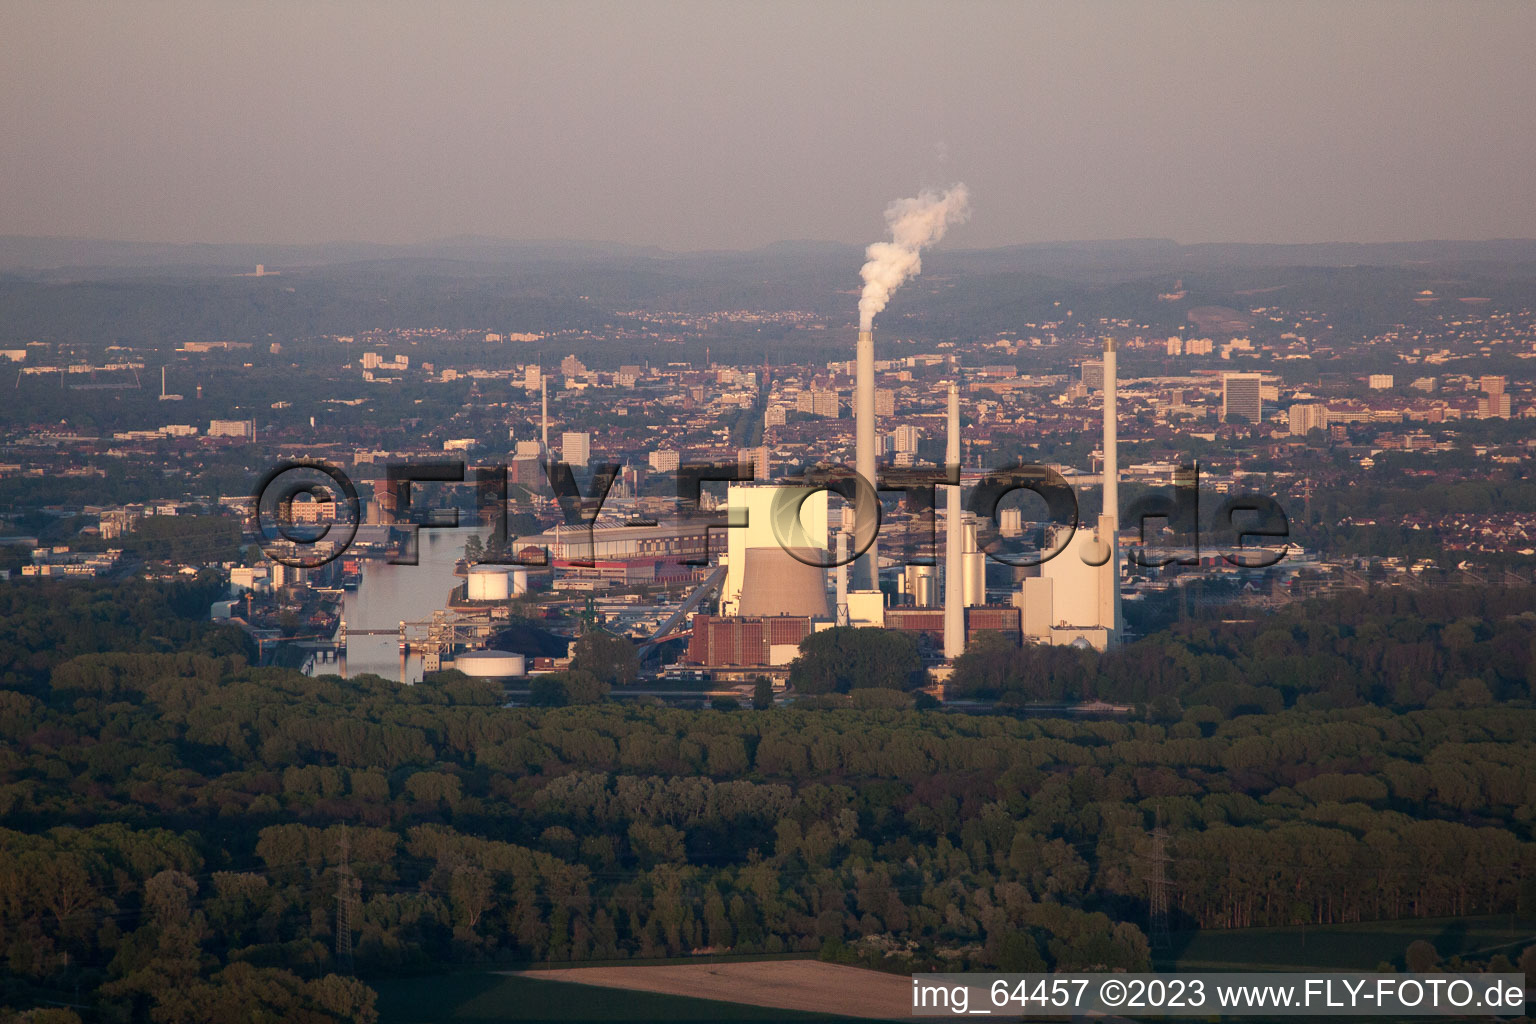 EnBW in the district Rheinhafen in Karlsruhe in the state Baden-Wuerttemberg, Germany from the plane